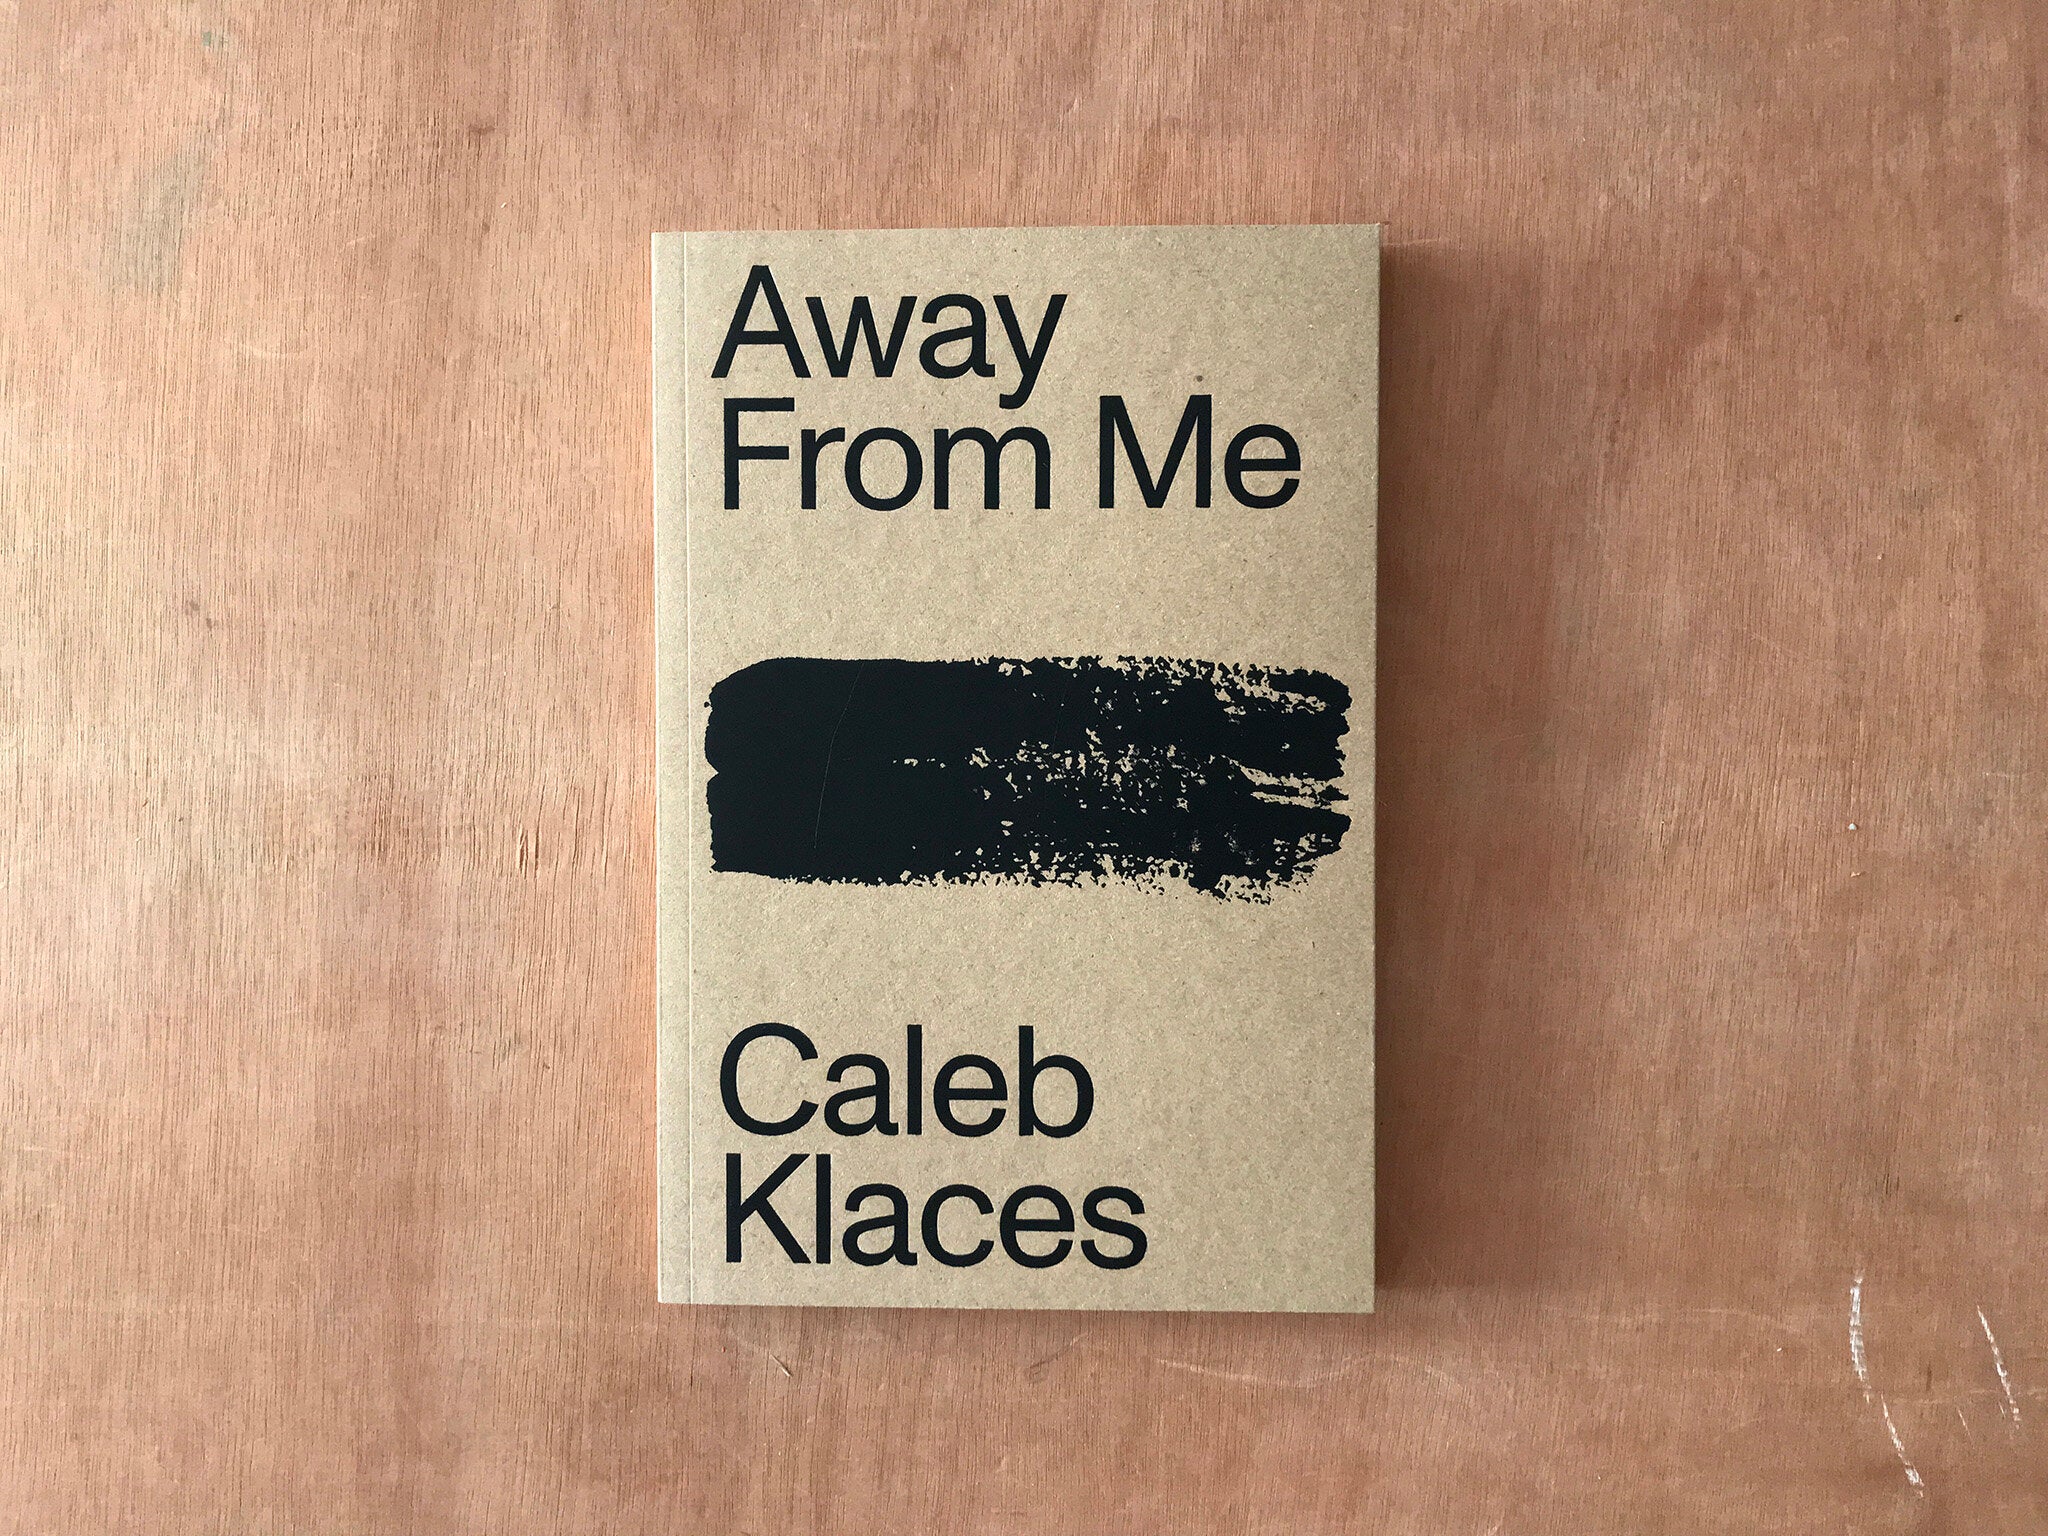 AWAY FROM ME by Caleb Klaces